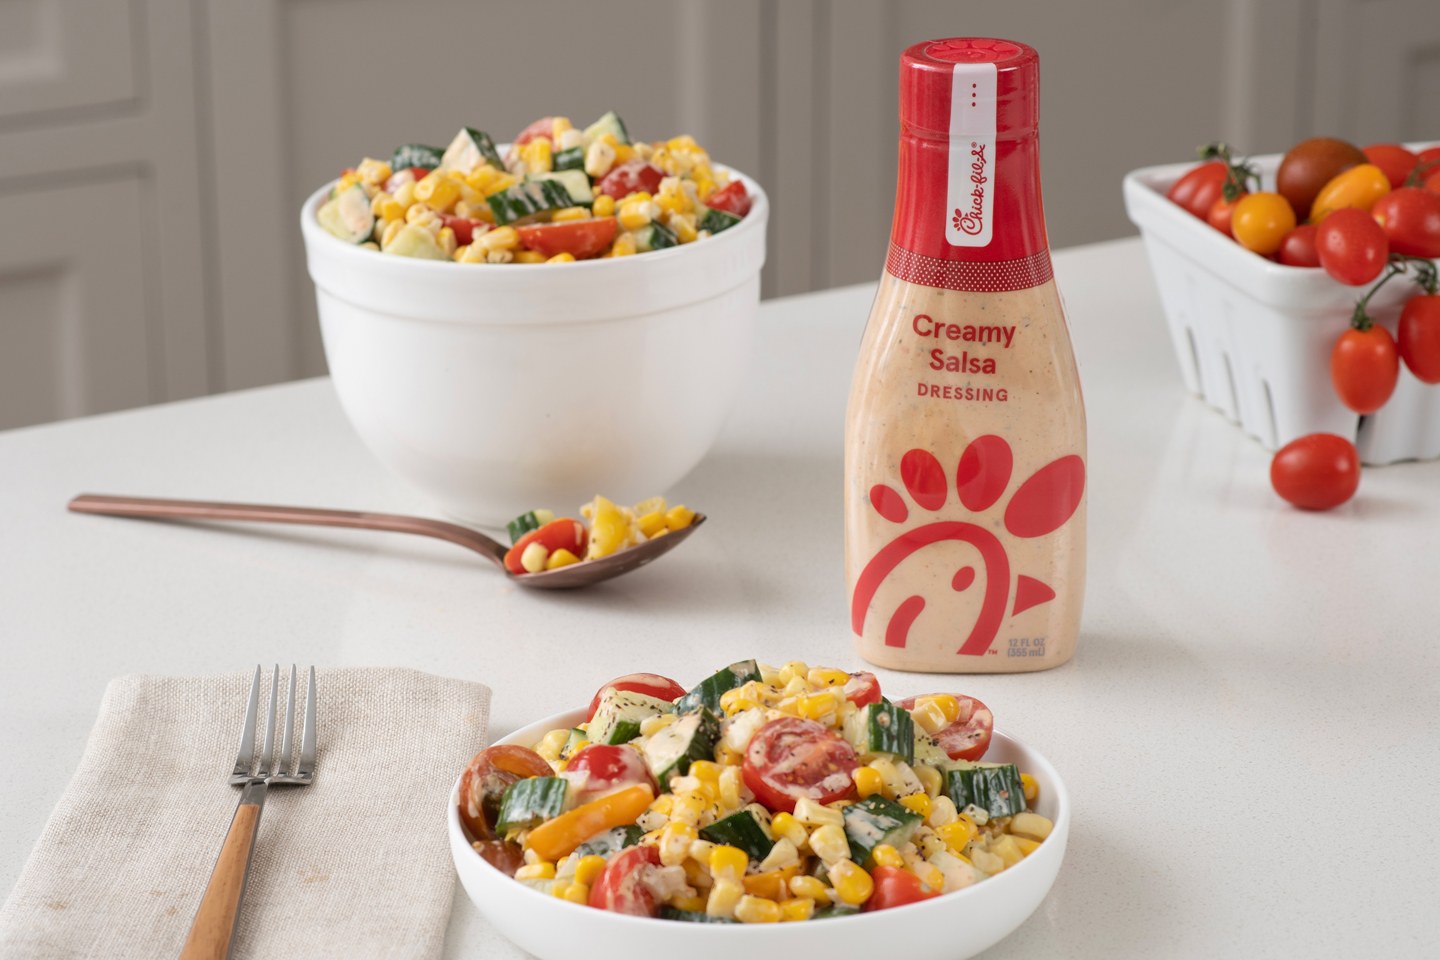 Southwest Creamy Salsa Corn Salad prepared in a bowl in front of a bottle of Creamy Salsa Dressing. 